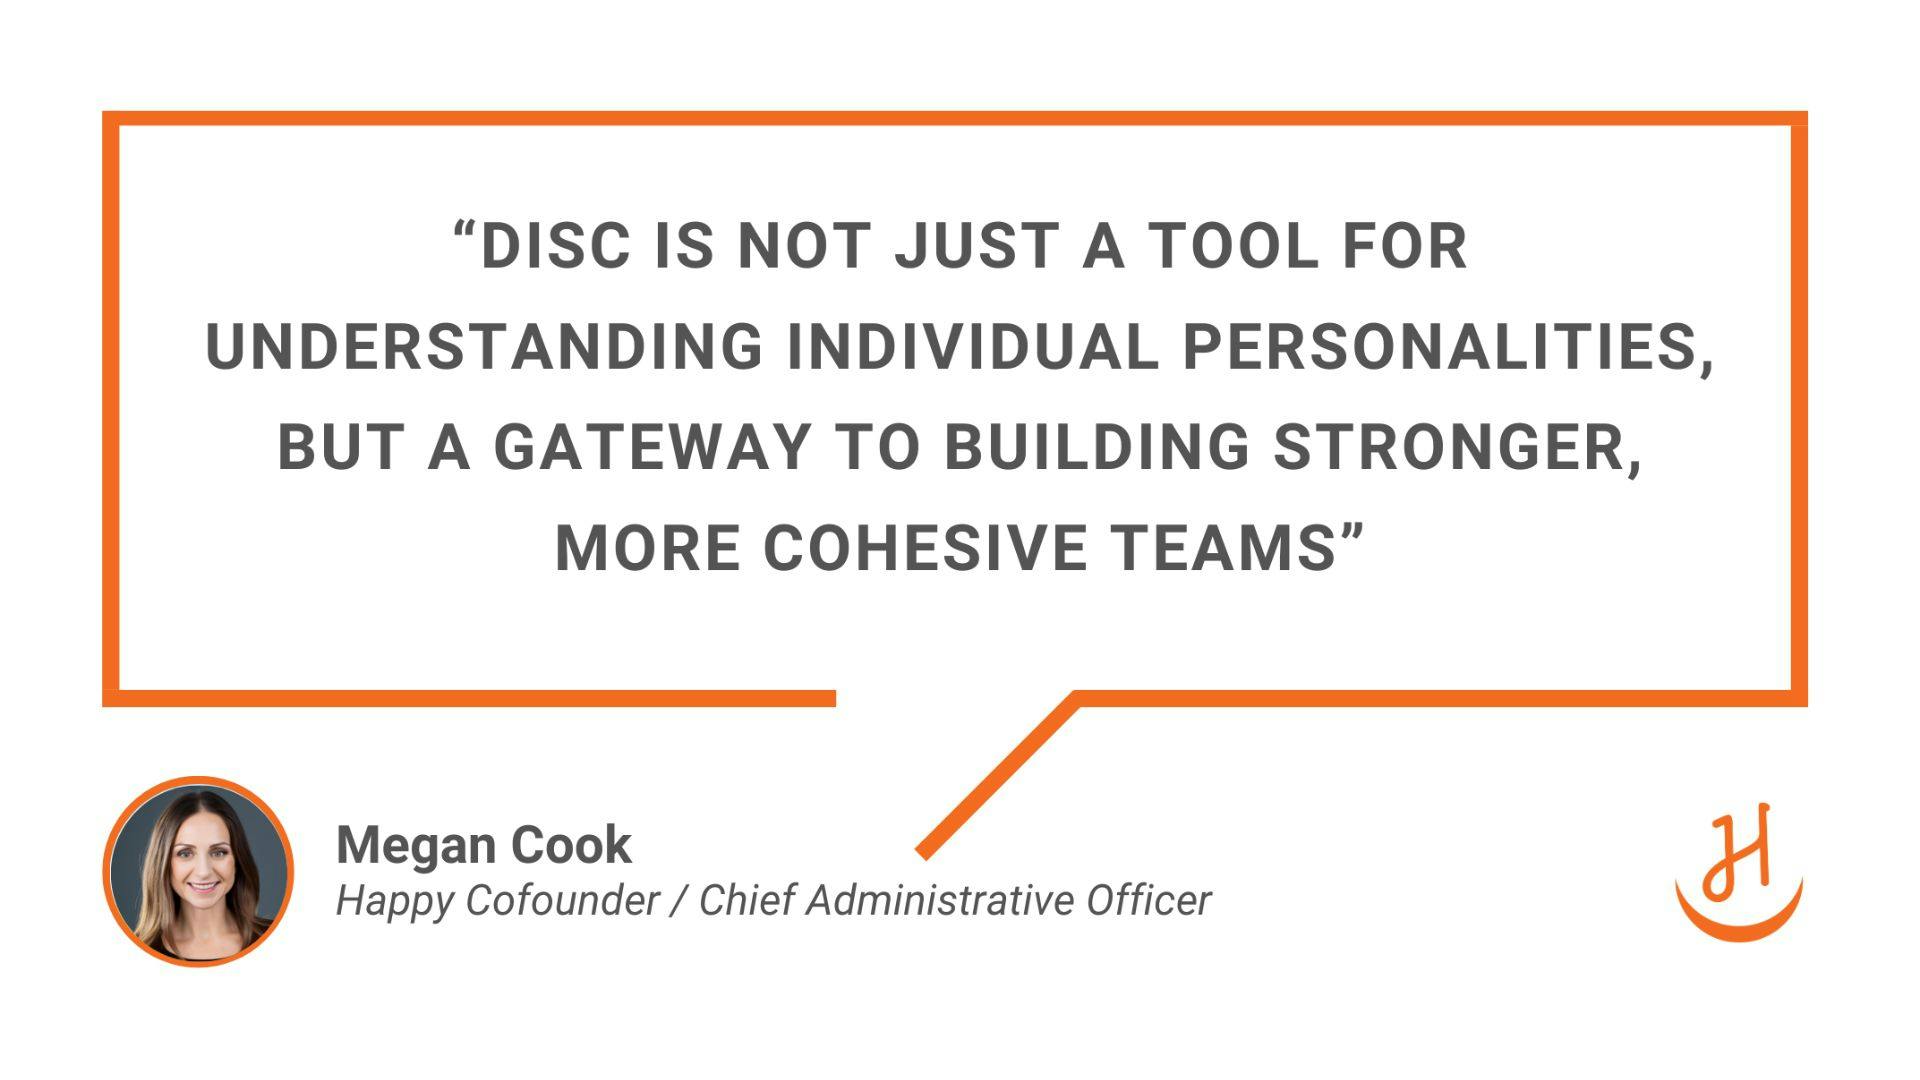 Quote from Megan Cook, Co-Founder of Happy, "DISC is not just a tool for understanding individual personalities, but a gateway to building stronger, more cohesive teams"